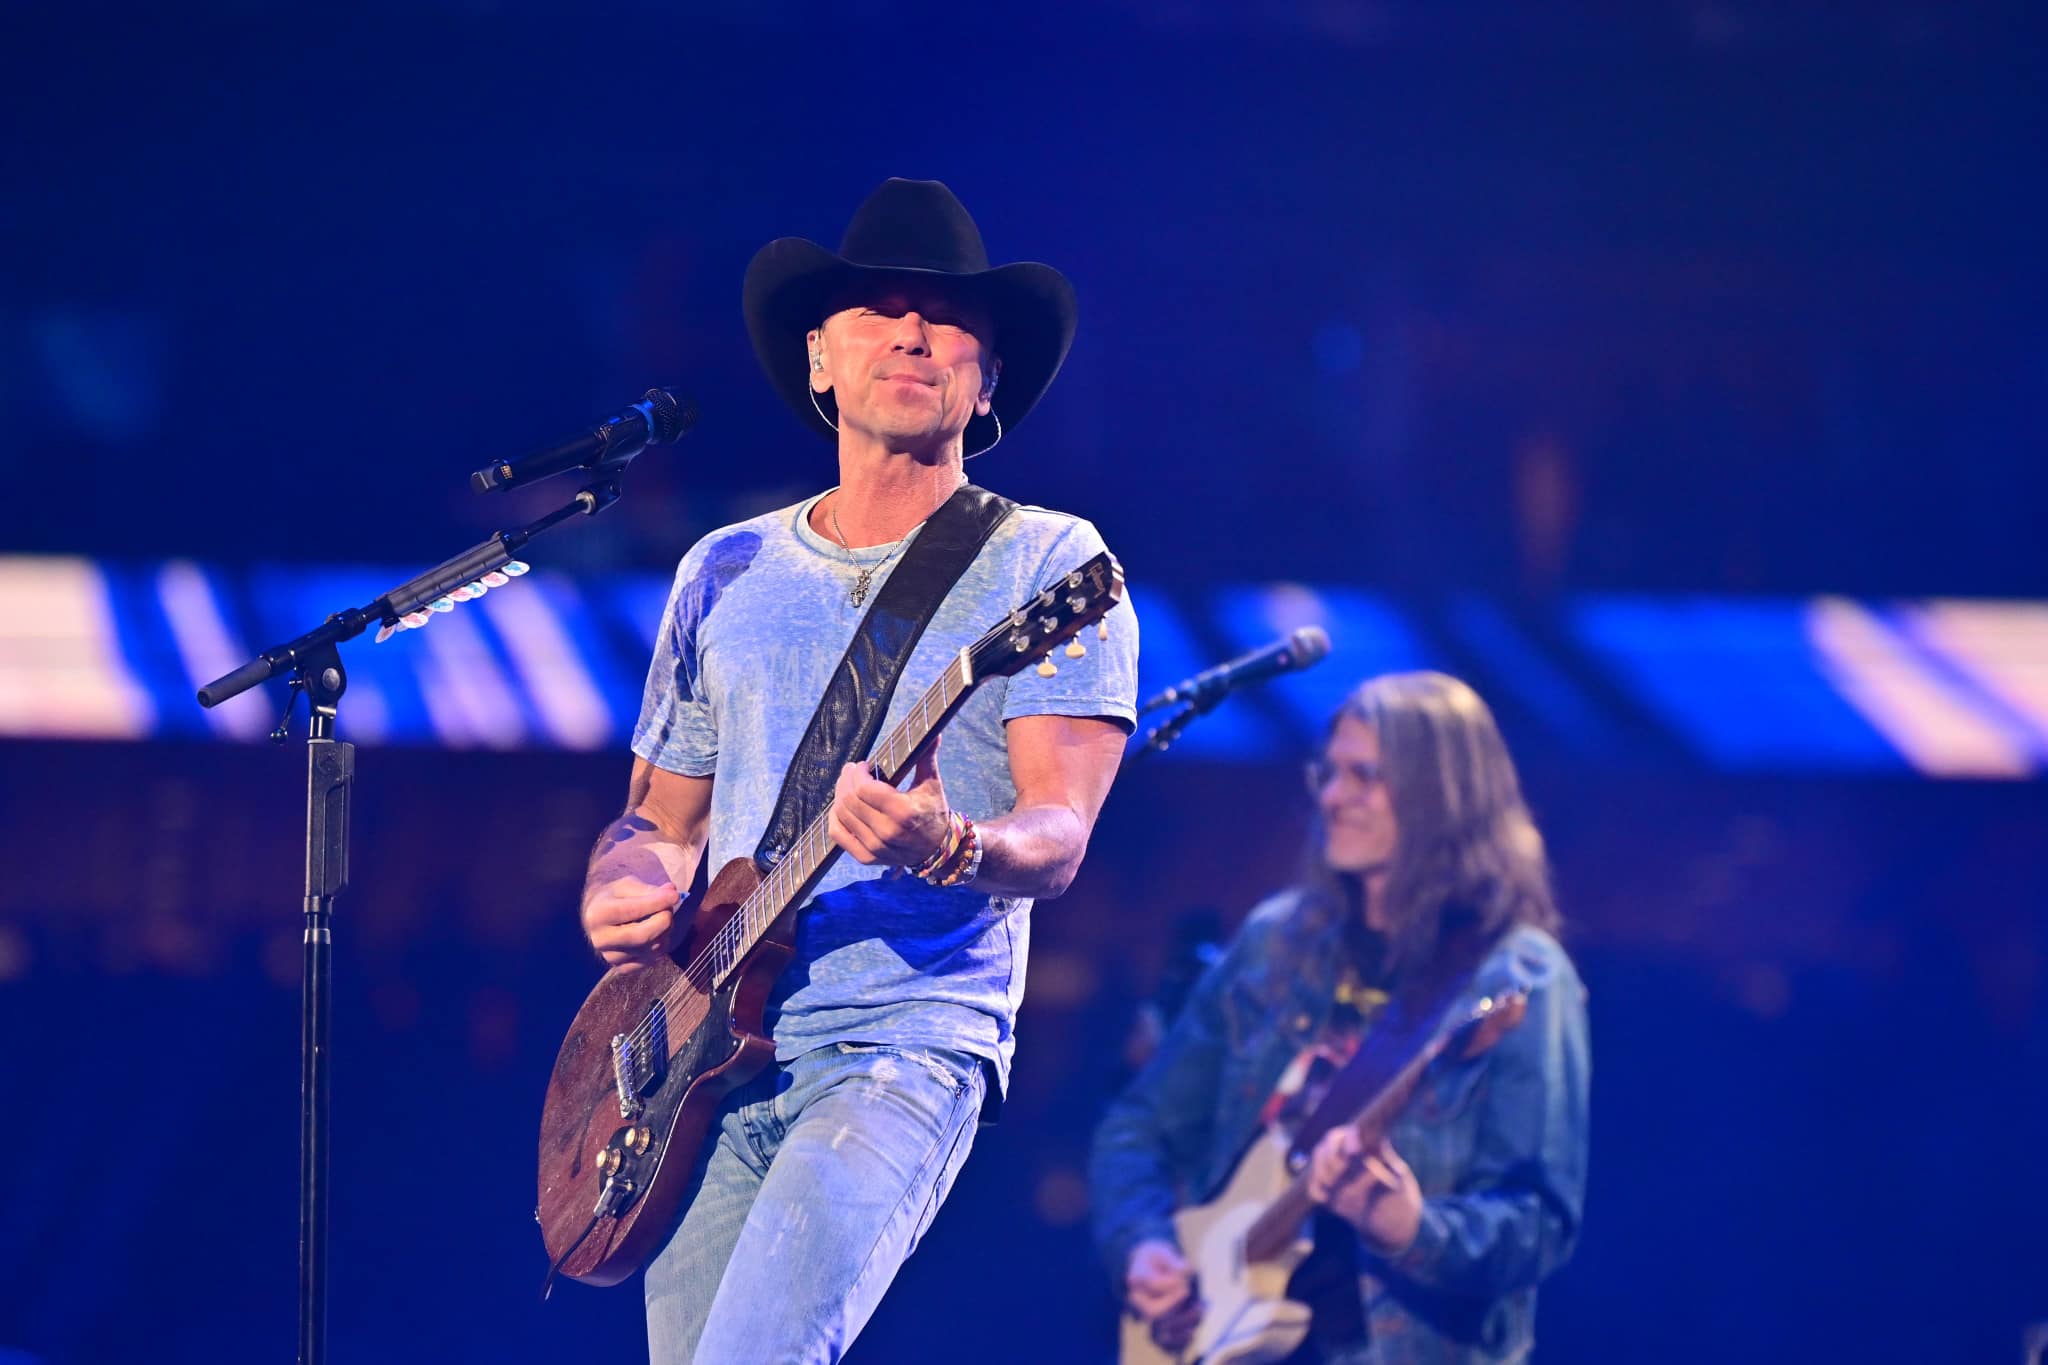 Kenny Chesney at Houston Rodeo A superstar returns after 7 years